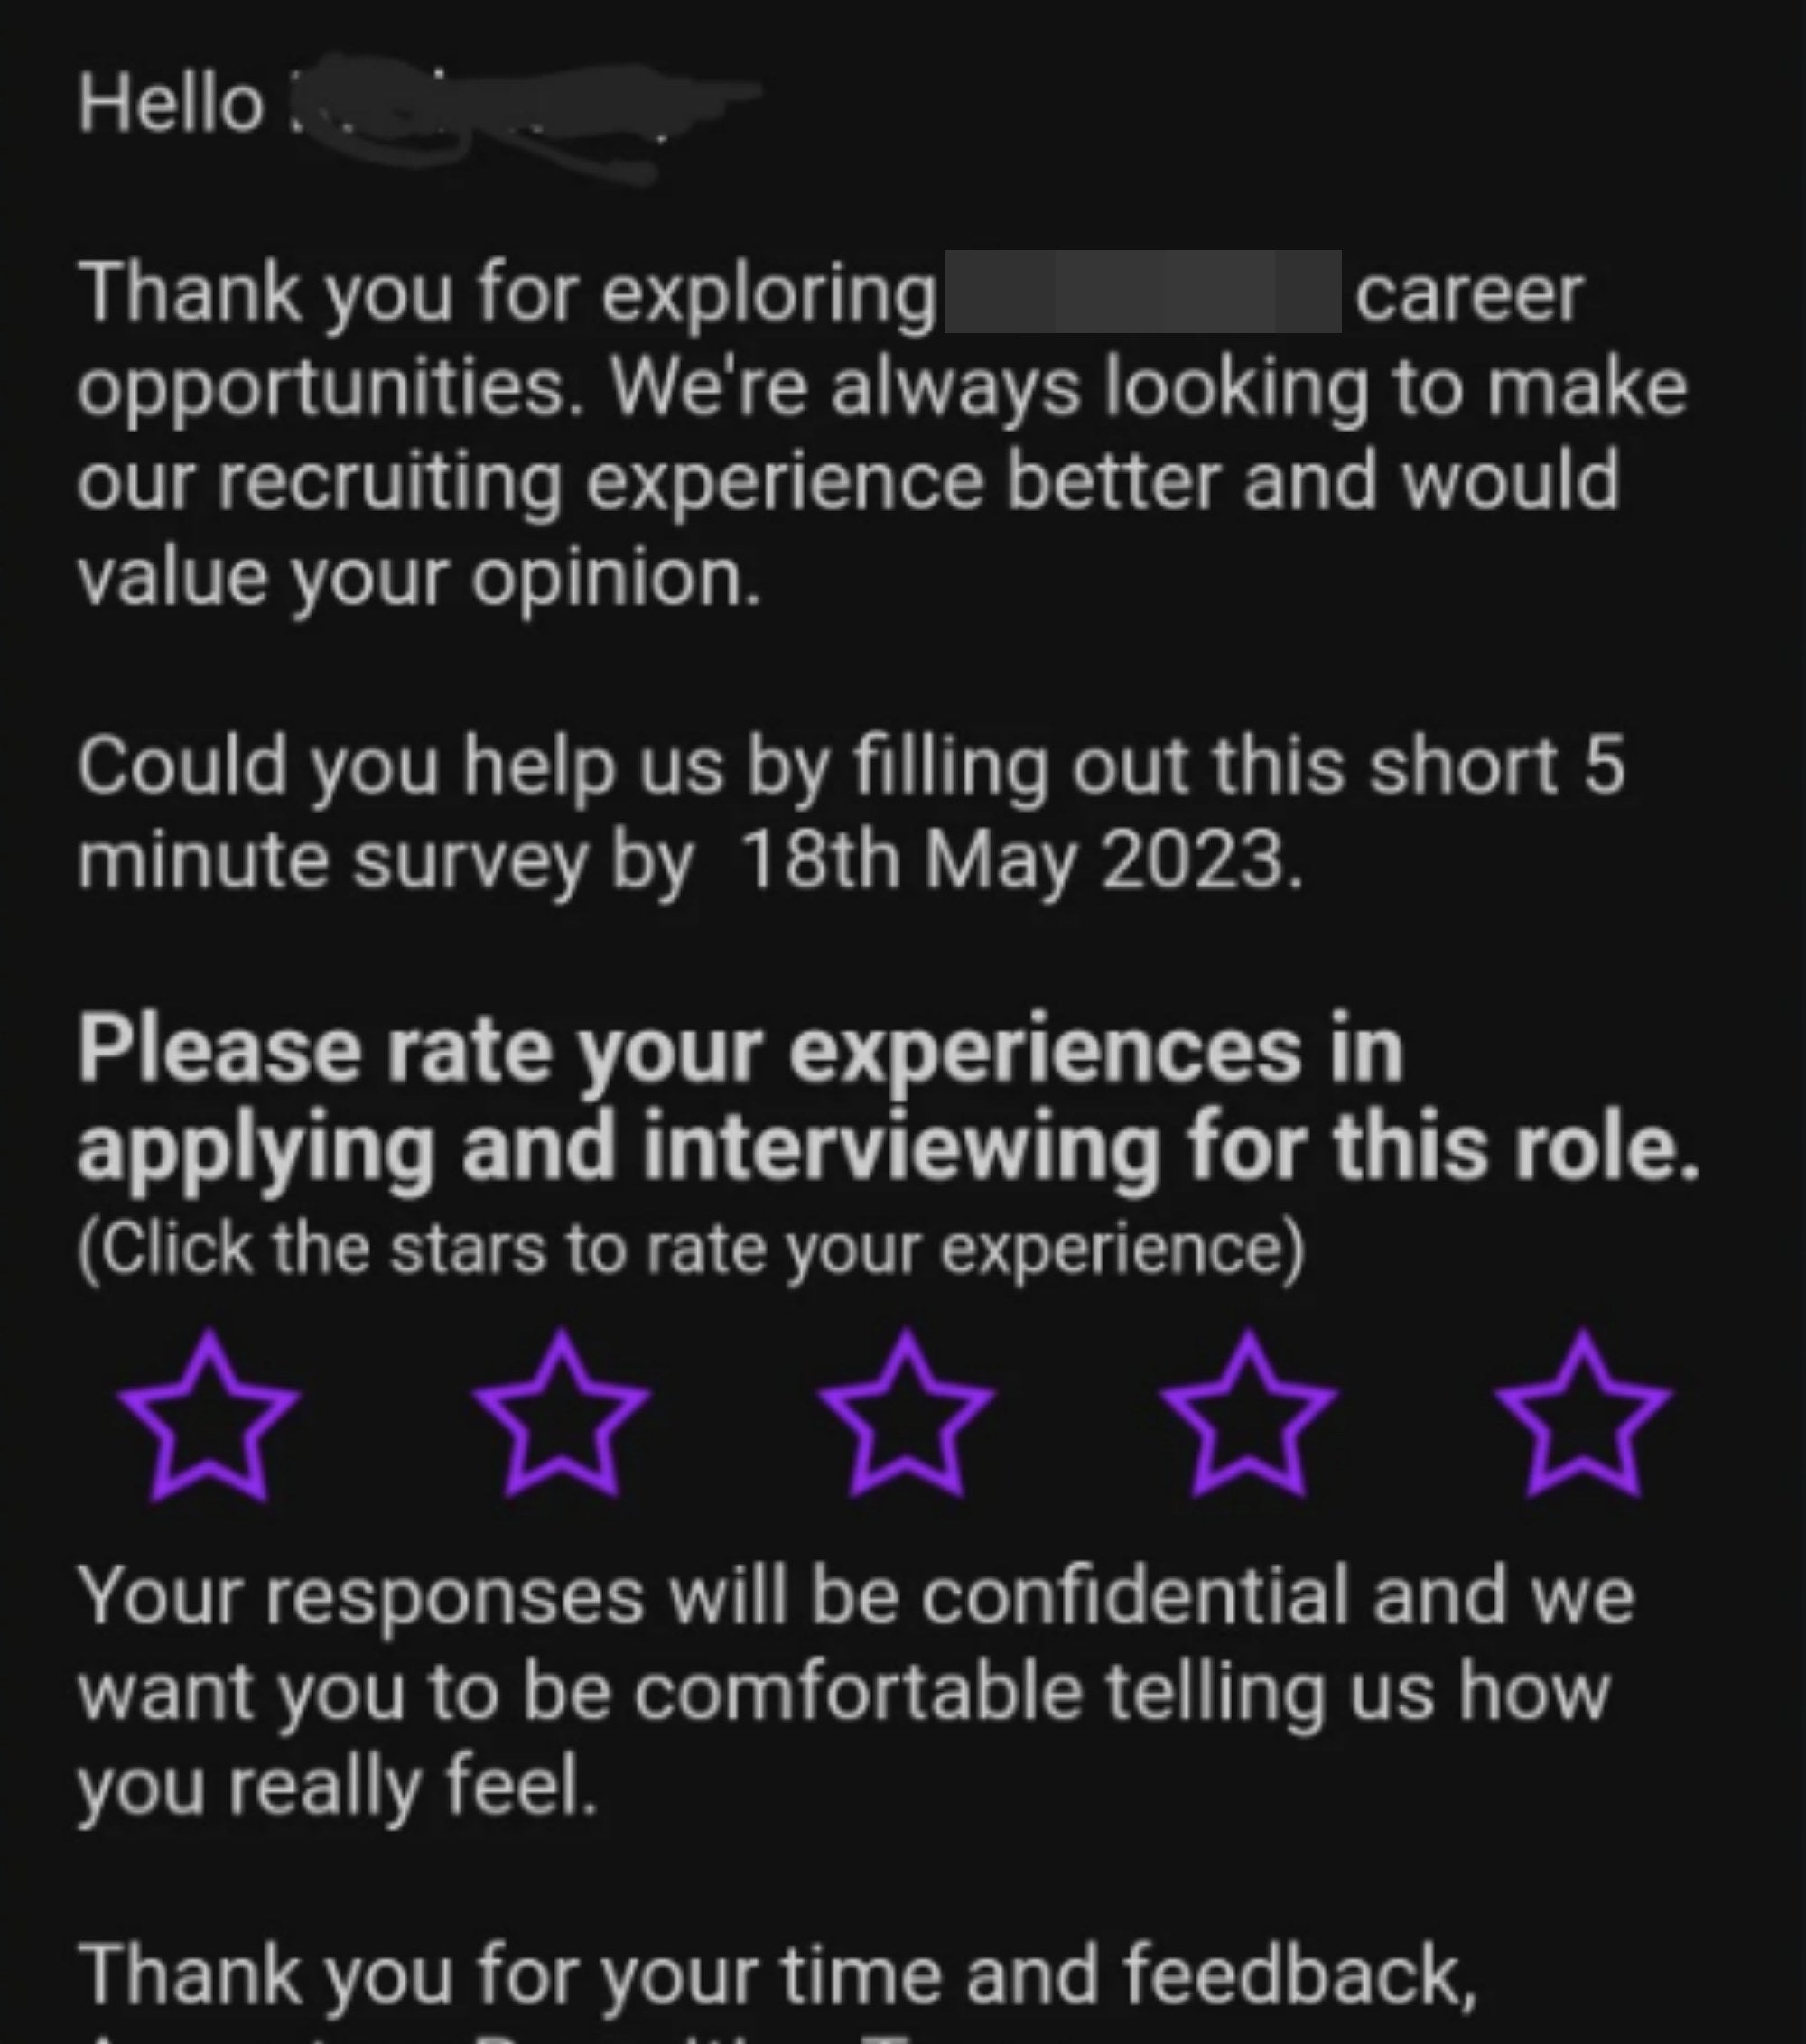 The email includes stars to give feedback on the application and interview process, and gives a deadline by which the survey must be completed